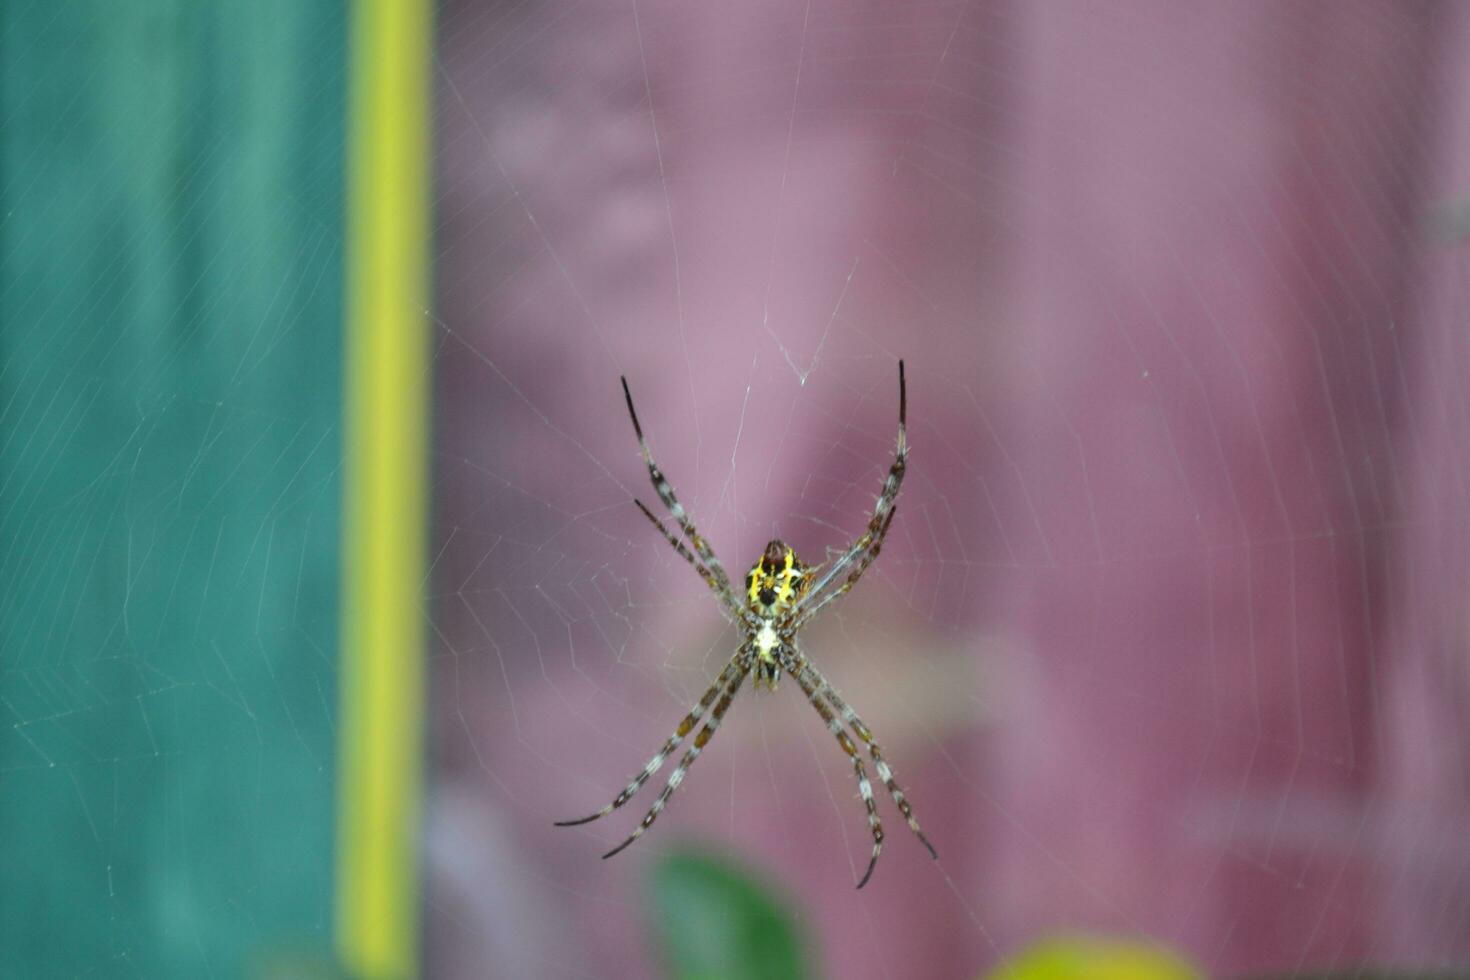 Photo of a spider hanging on its web